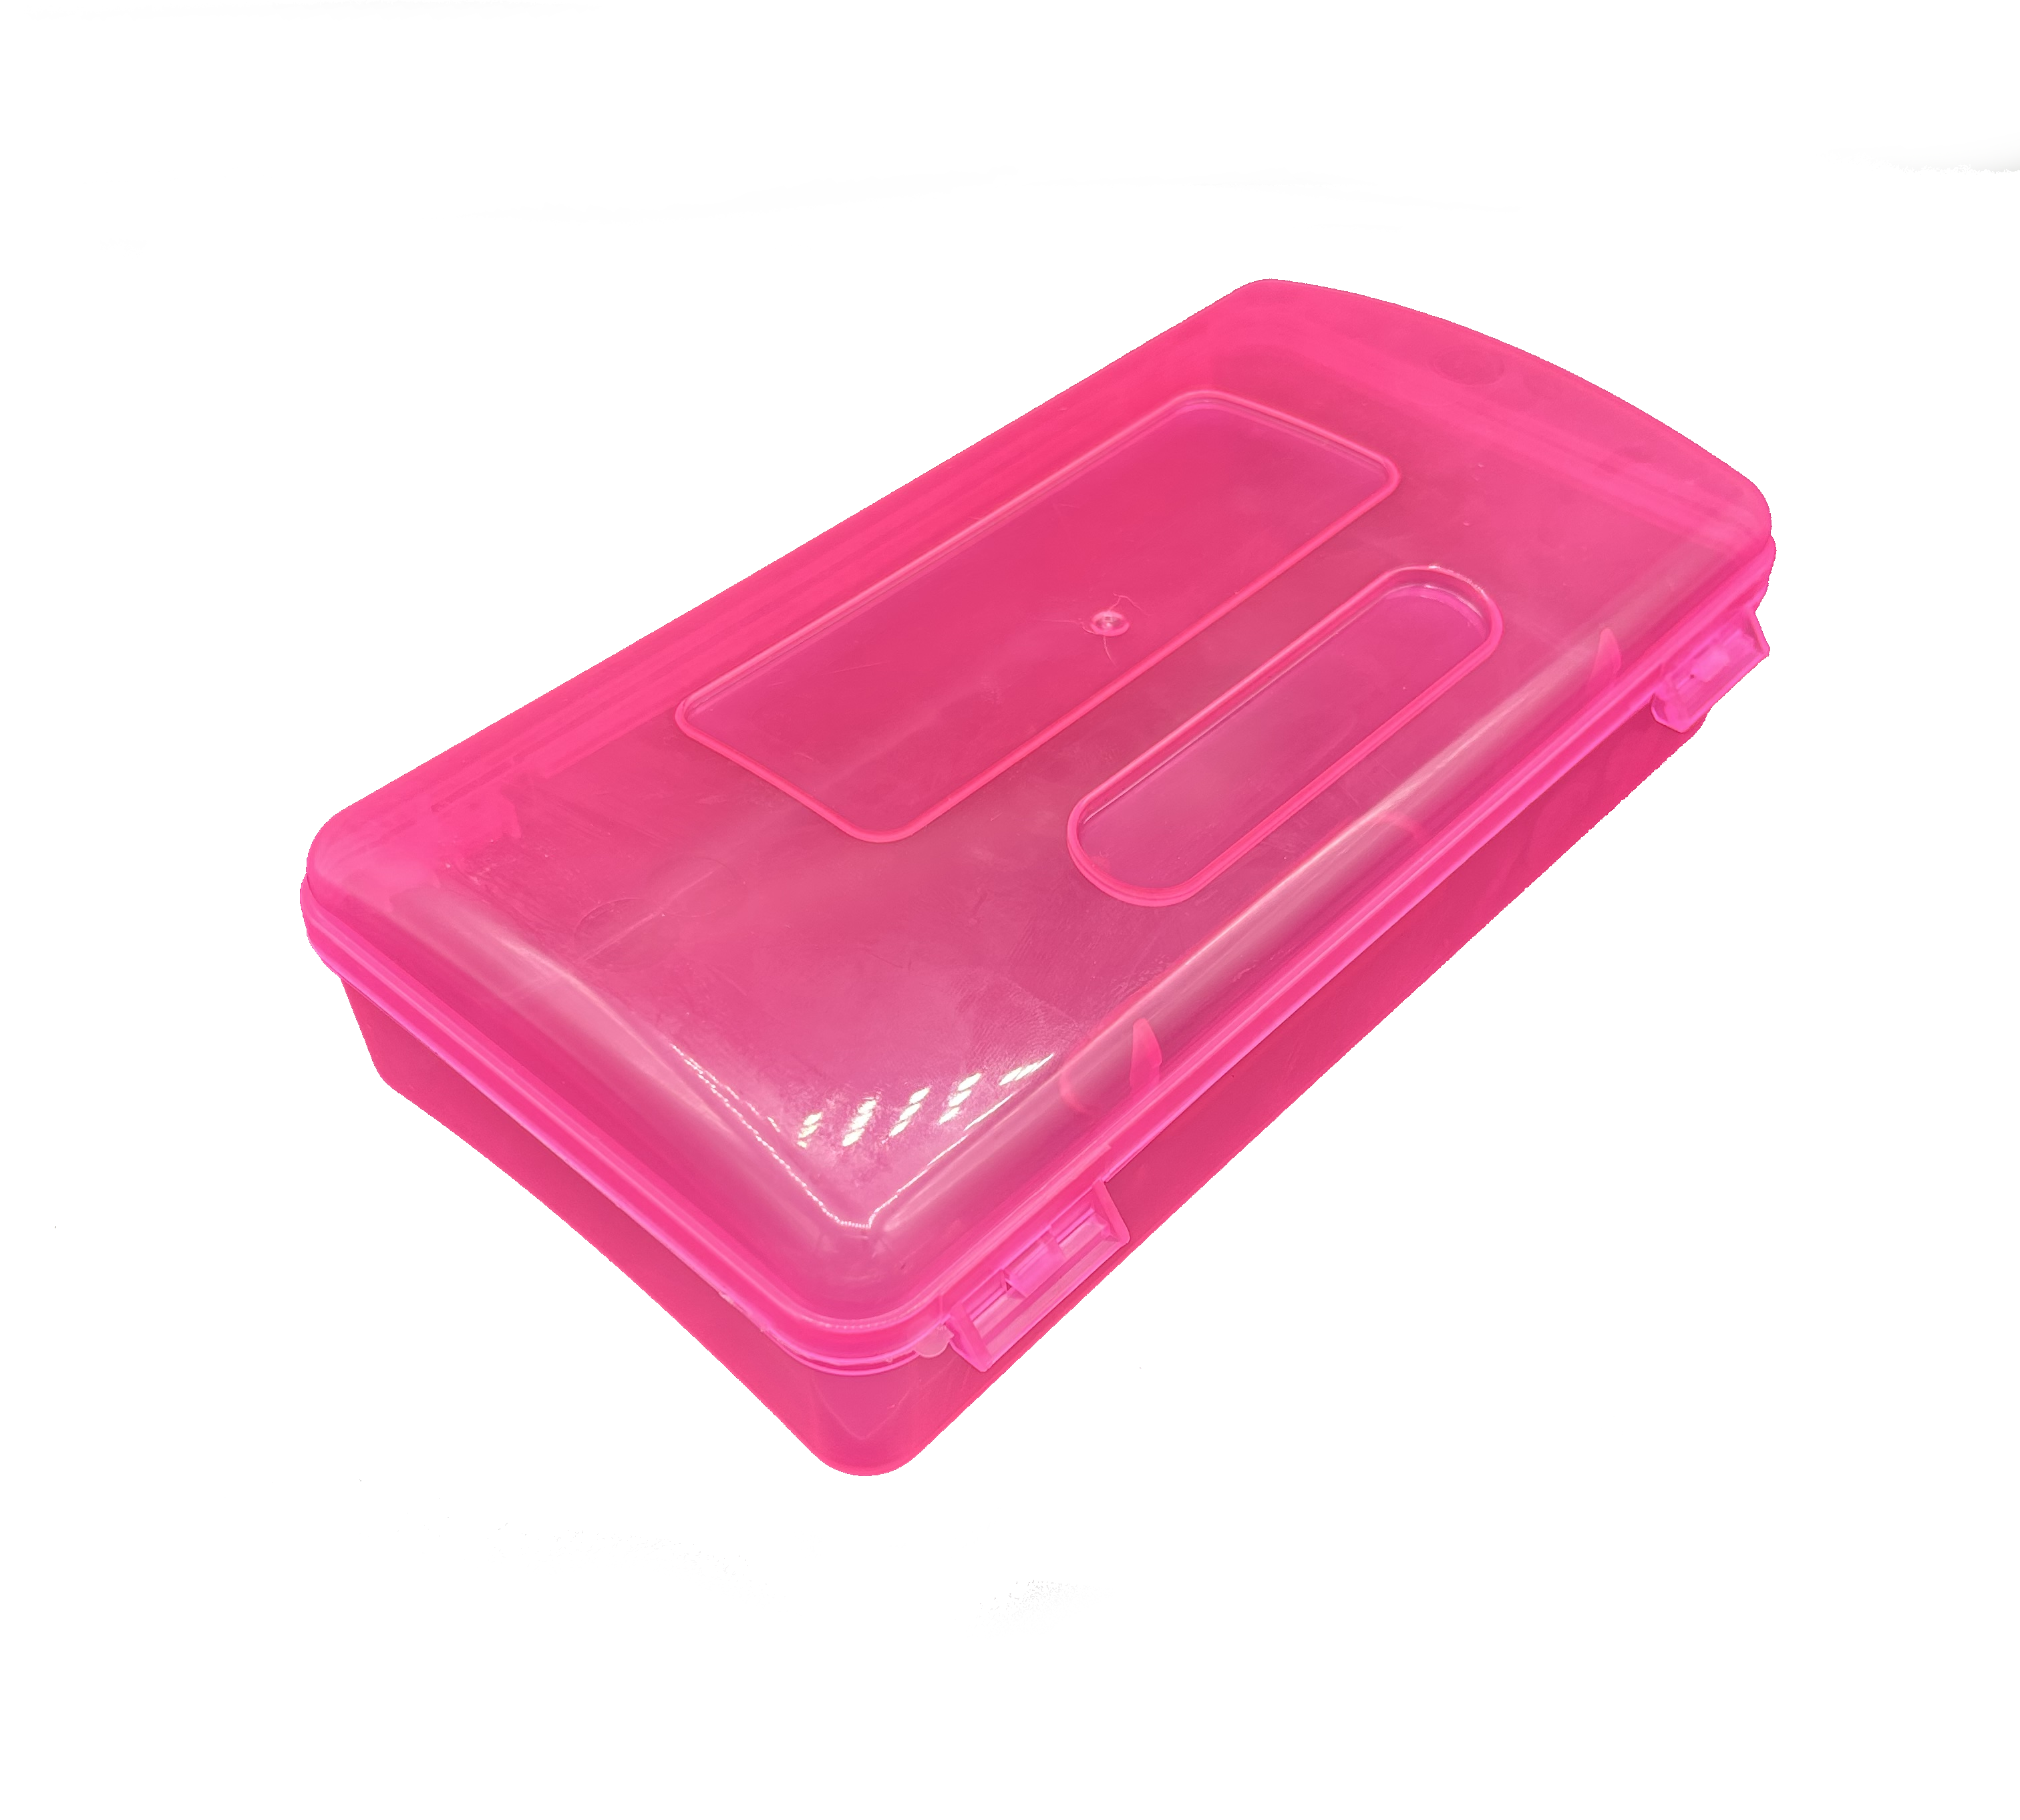 Pencil Box - Opportunity Buy